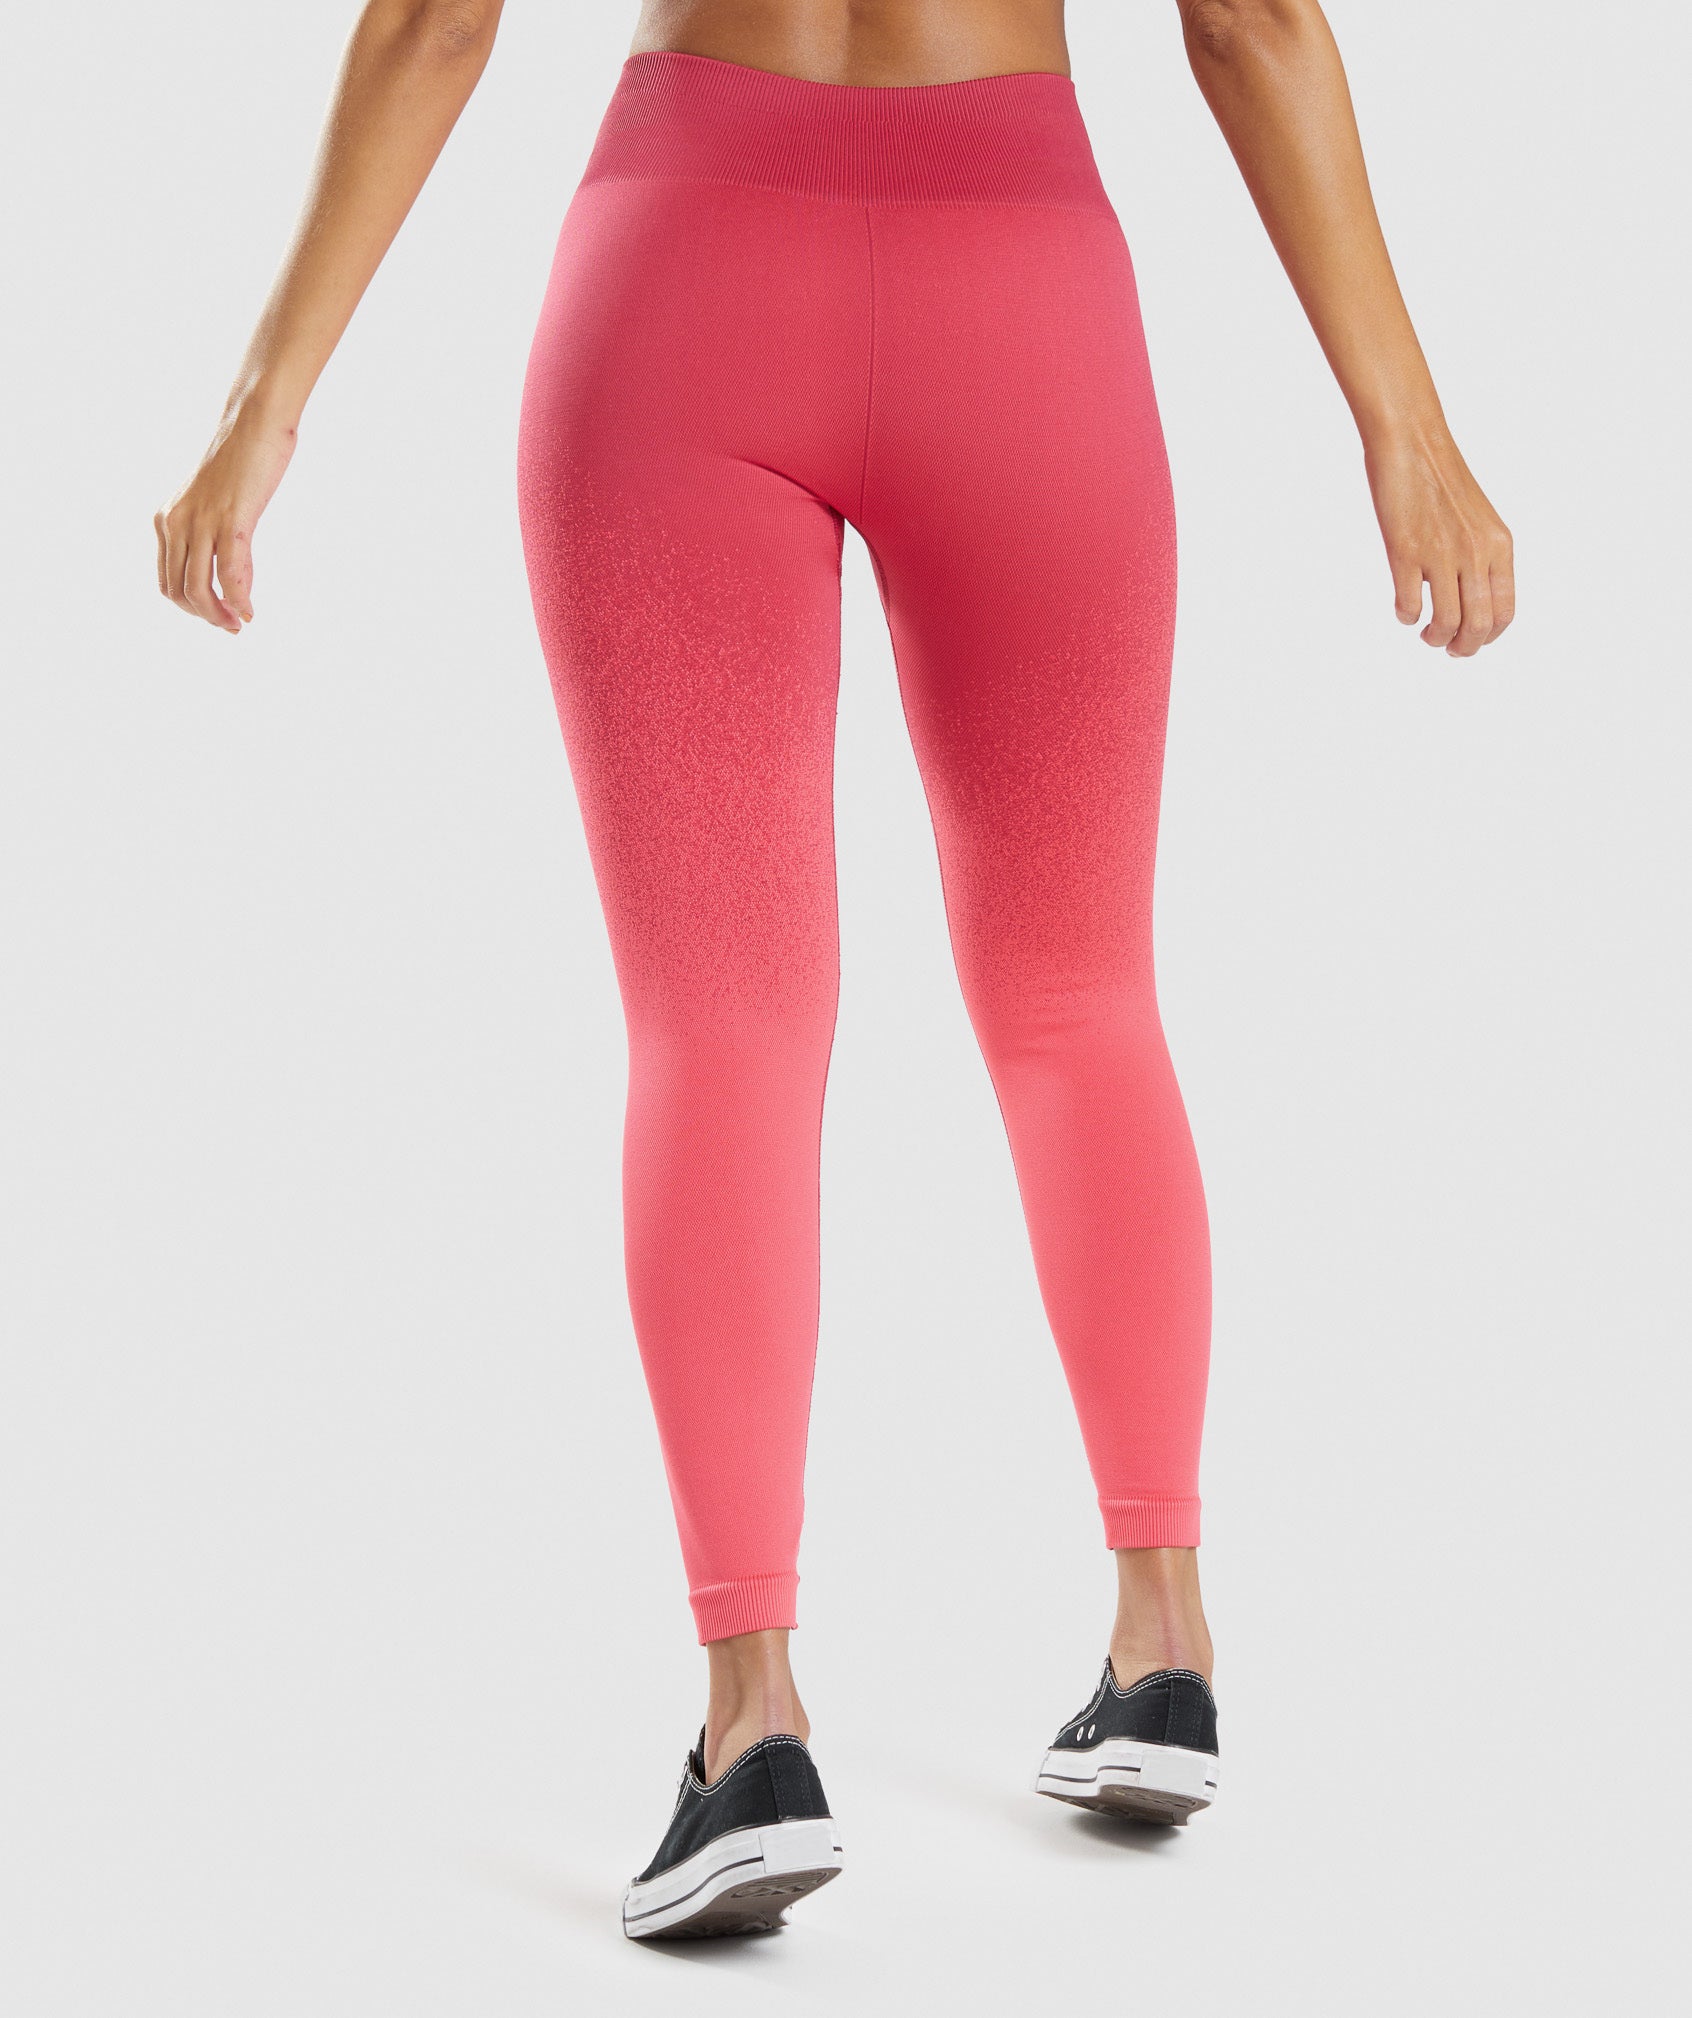 Gymshark Grey Pink Adapt Ombre Seamless Leggings SEE MEASUREMENTS - $32 -  From Madi